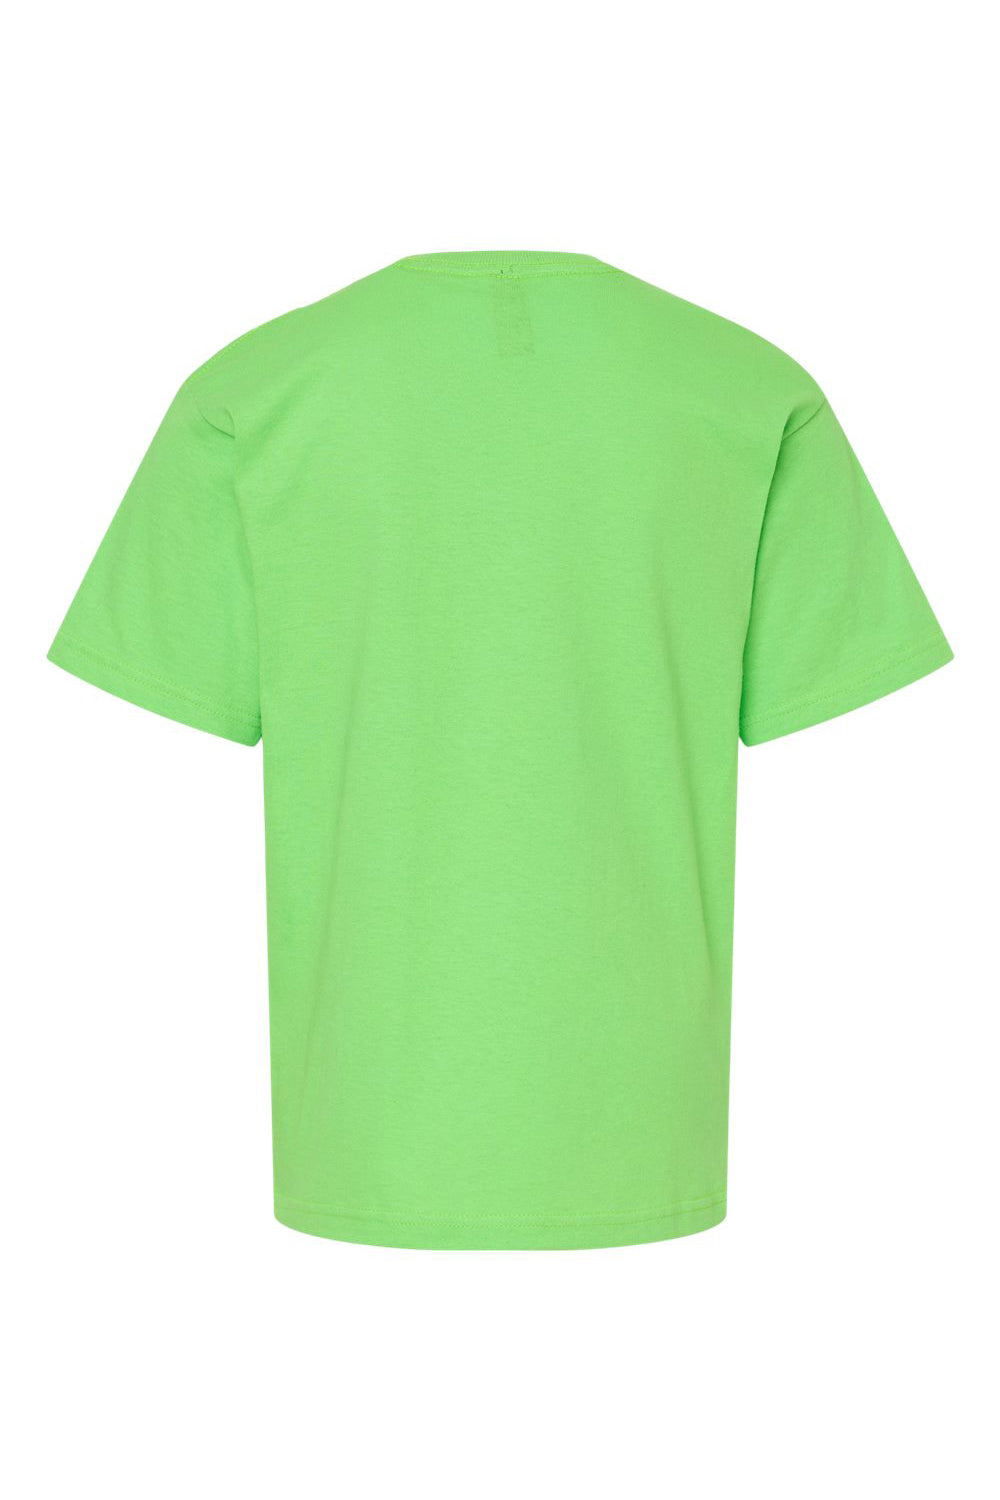 M&O 4850 Youth Gold Soft Touch Short Sleeve Crewneck T-Shirt Vivid Lime Green Flat Back